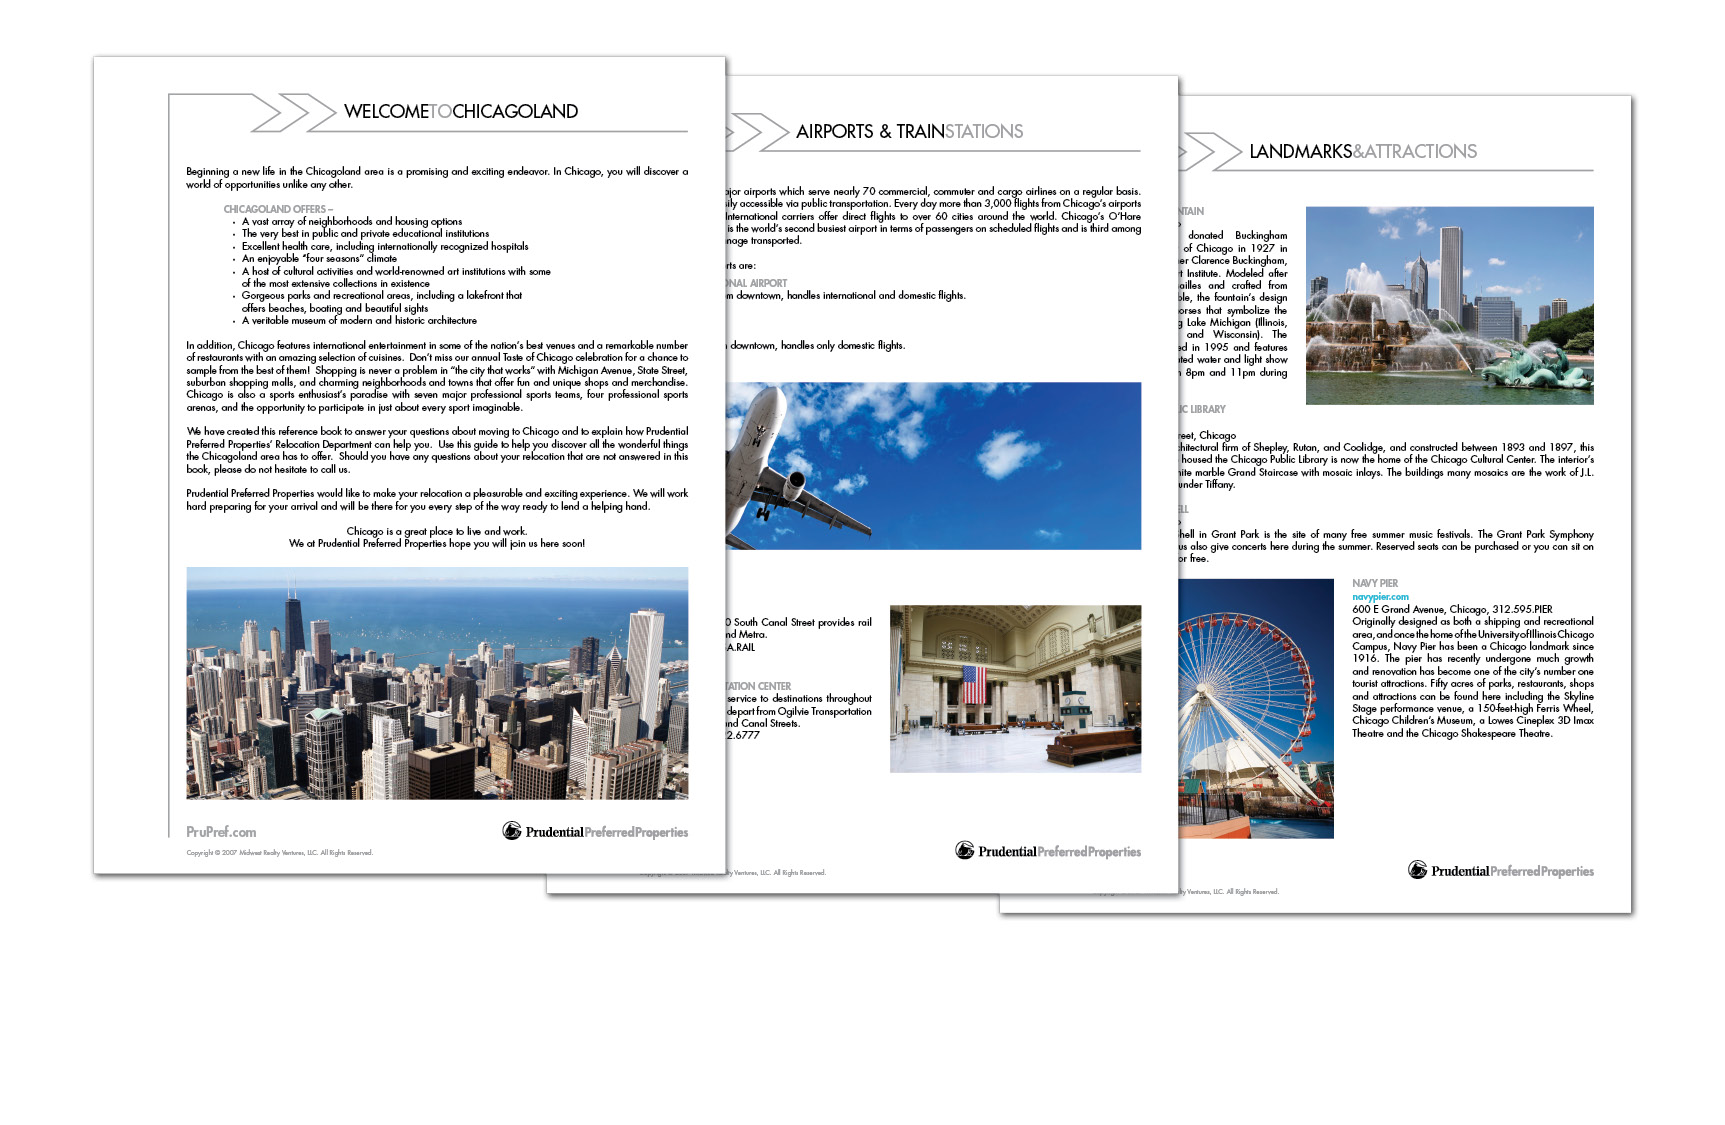  Sample of interior pages for the Relocation Guide. 